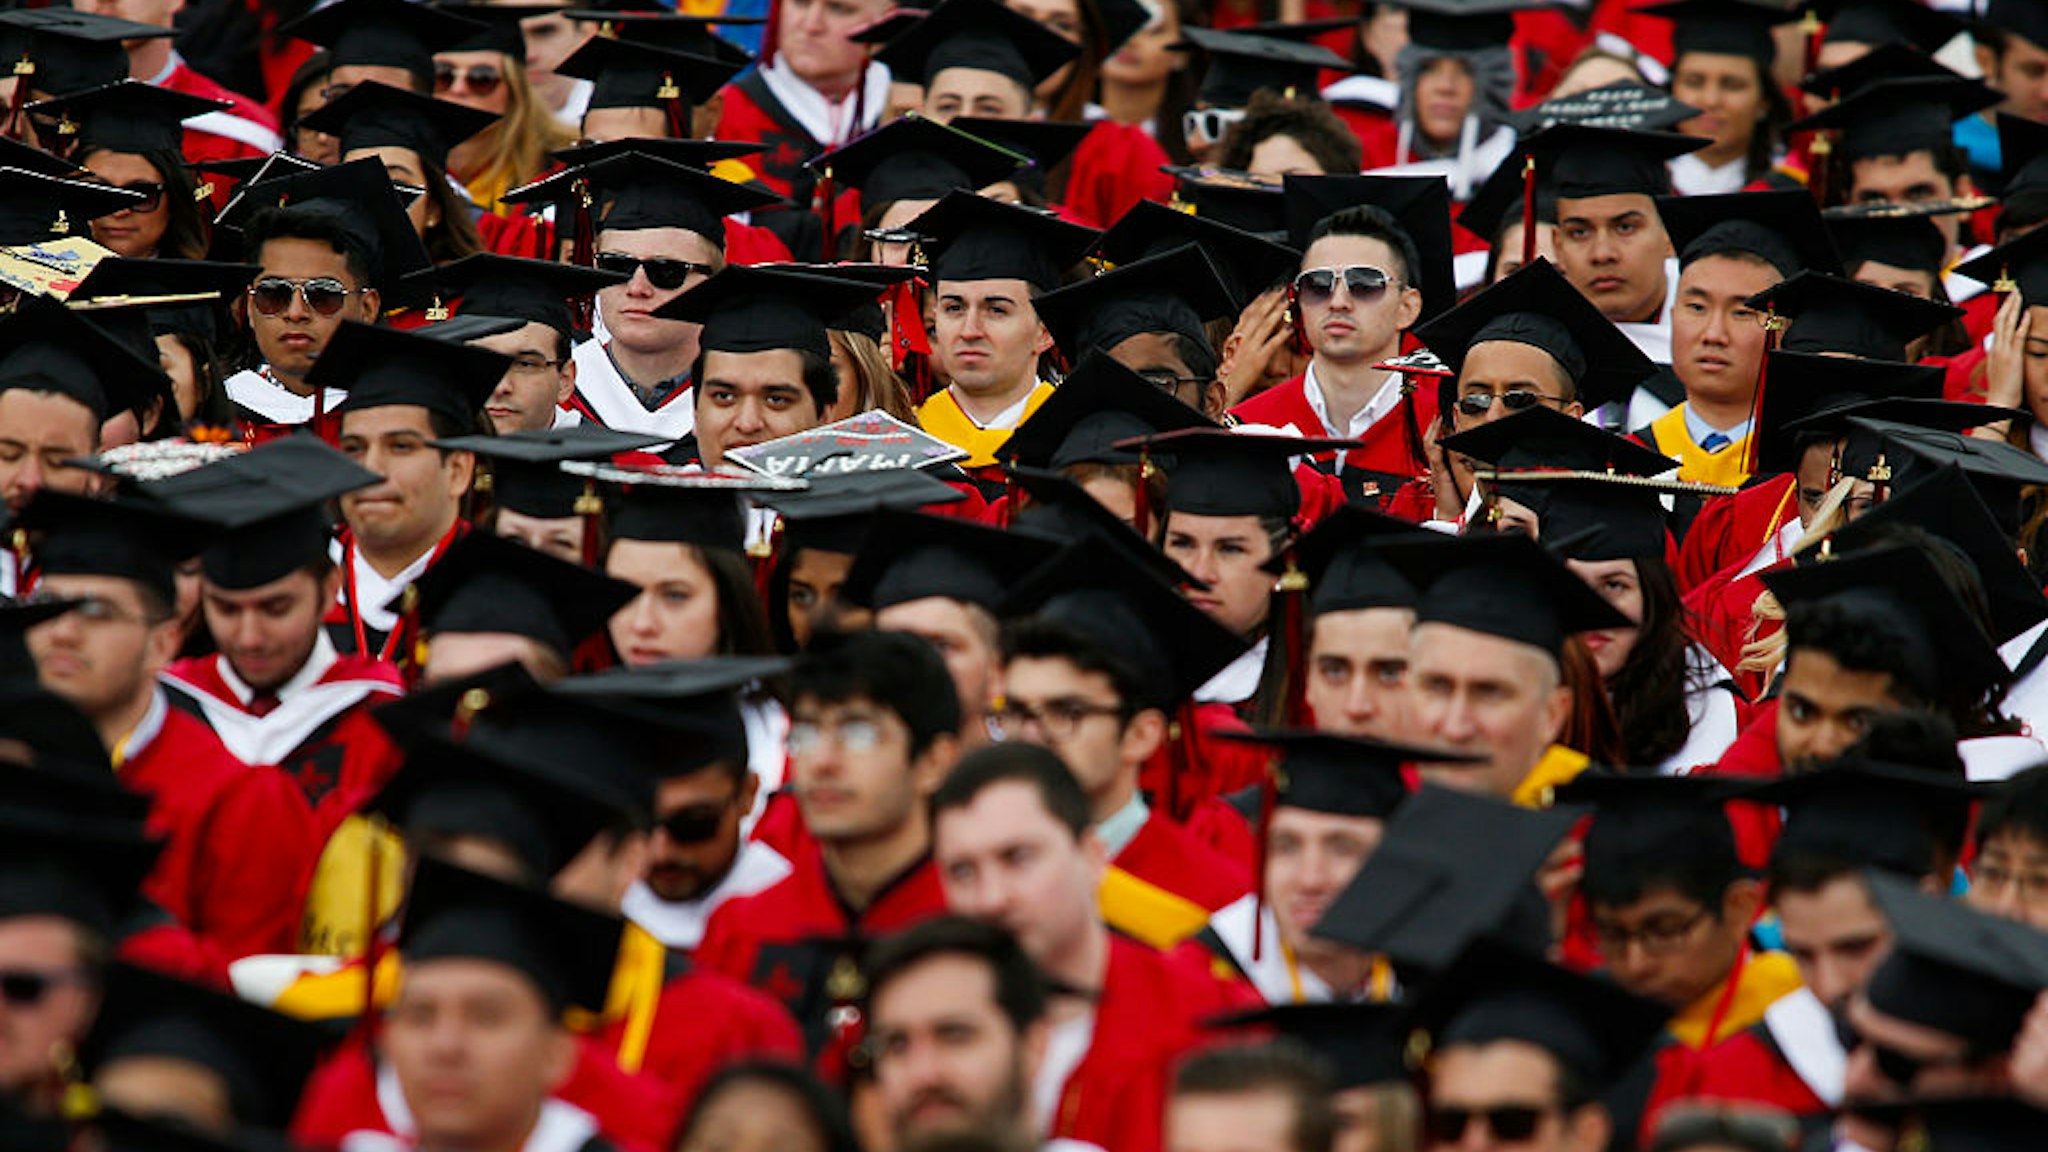 NEW BRUNSWICK, NJ - MAY 15: Students listen to U.S. President Barack Obama while he speaks after receiving an honorary doctorate of laws during the 250th anniversary commencement ceremony at Rutgers University on May 15, 2016 in New Brunswick, New Jersey. Obama is the first sitting president to speak at the school's commencement. (Photo by Eduardo Munoz Alvarez/Getty Images)